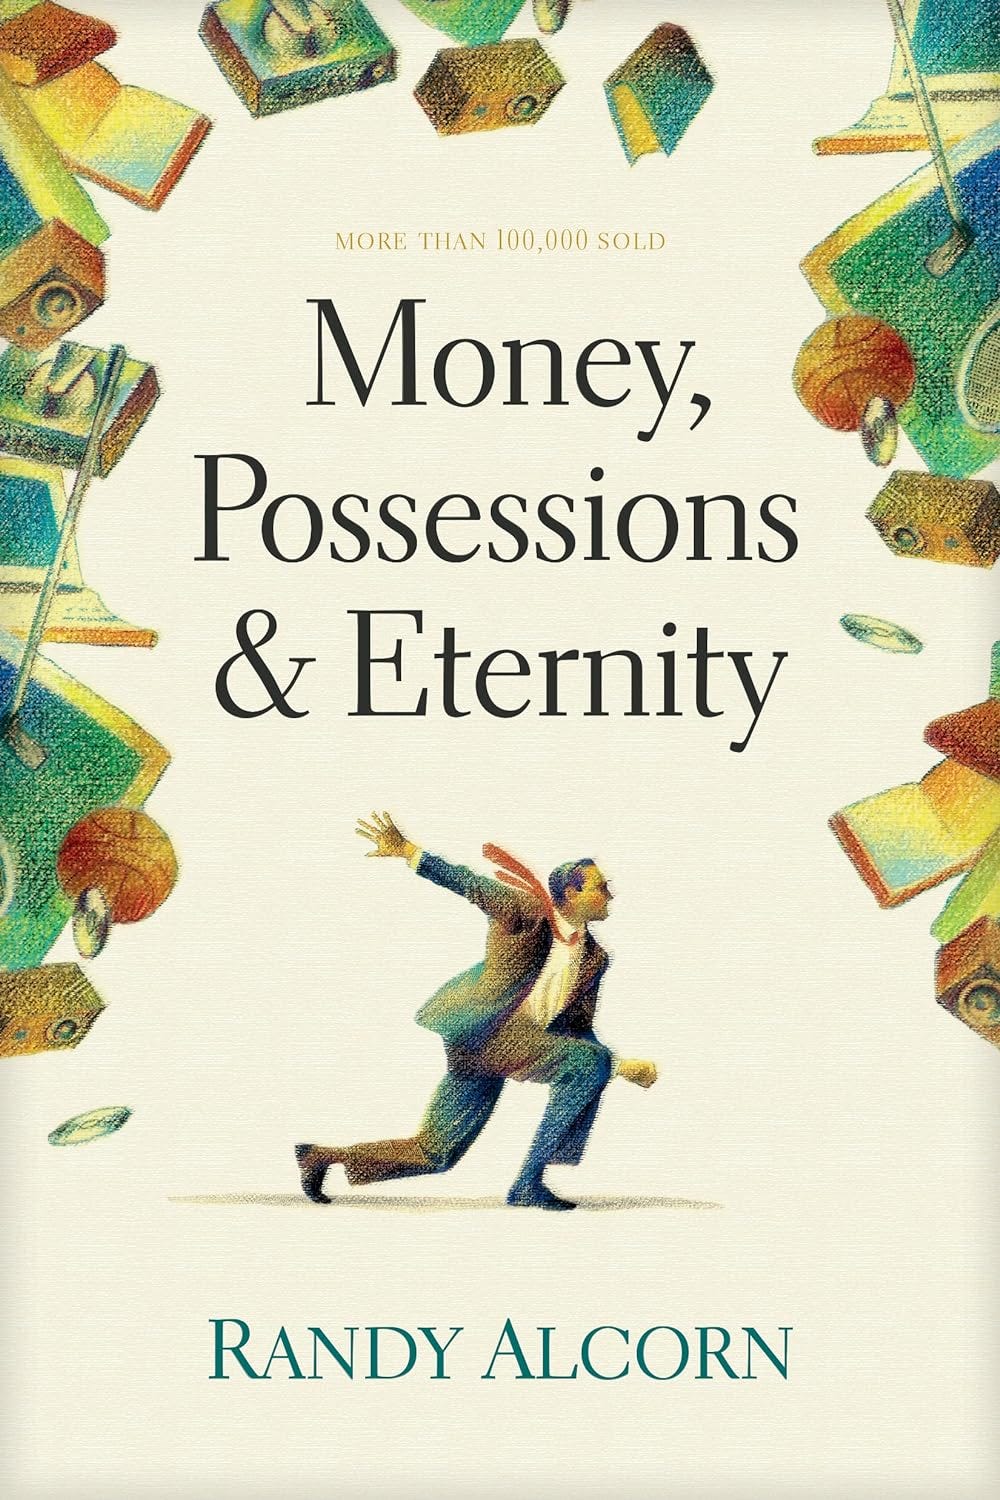 Image of a book cover from Money, Possessions and Eternity by Randy Alcorn.